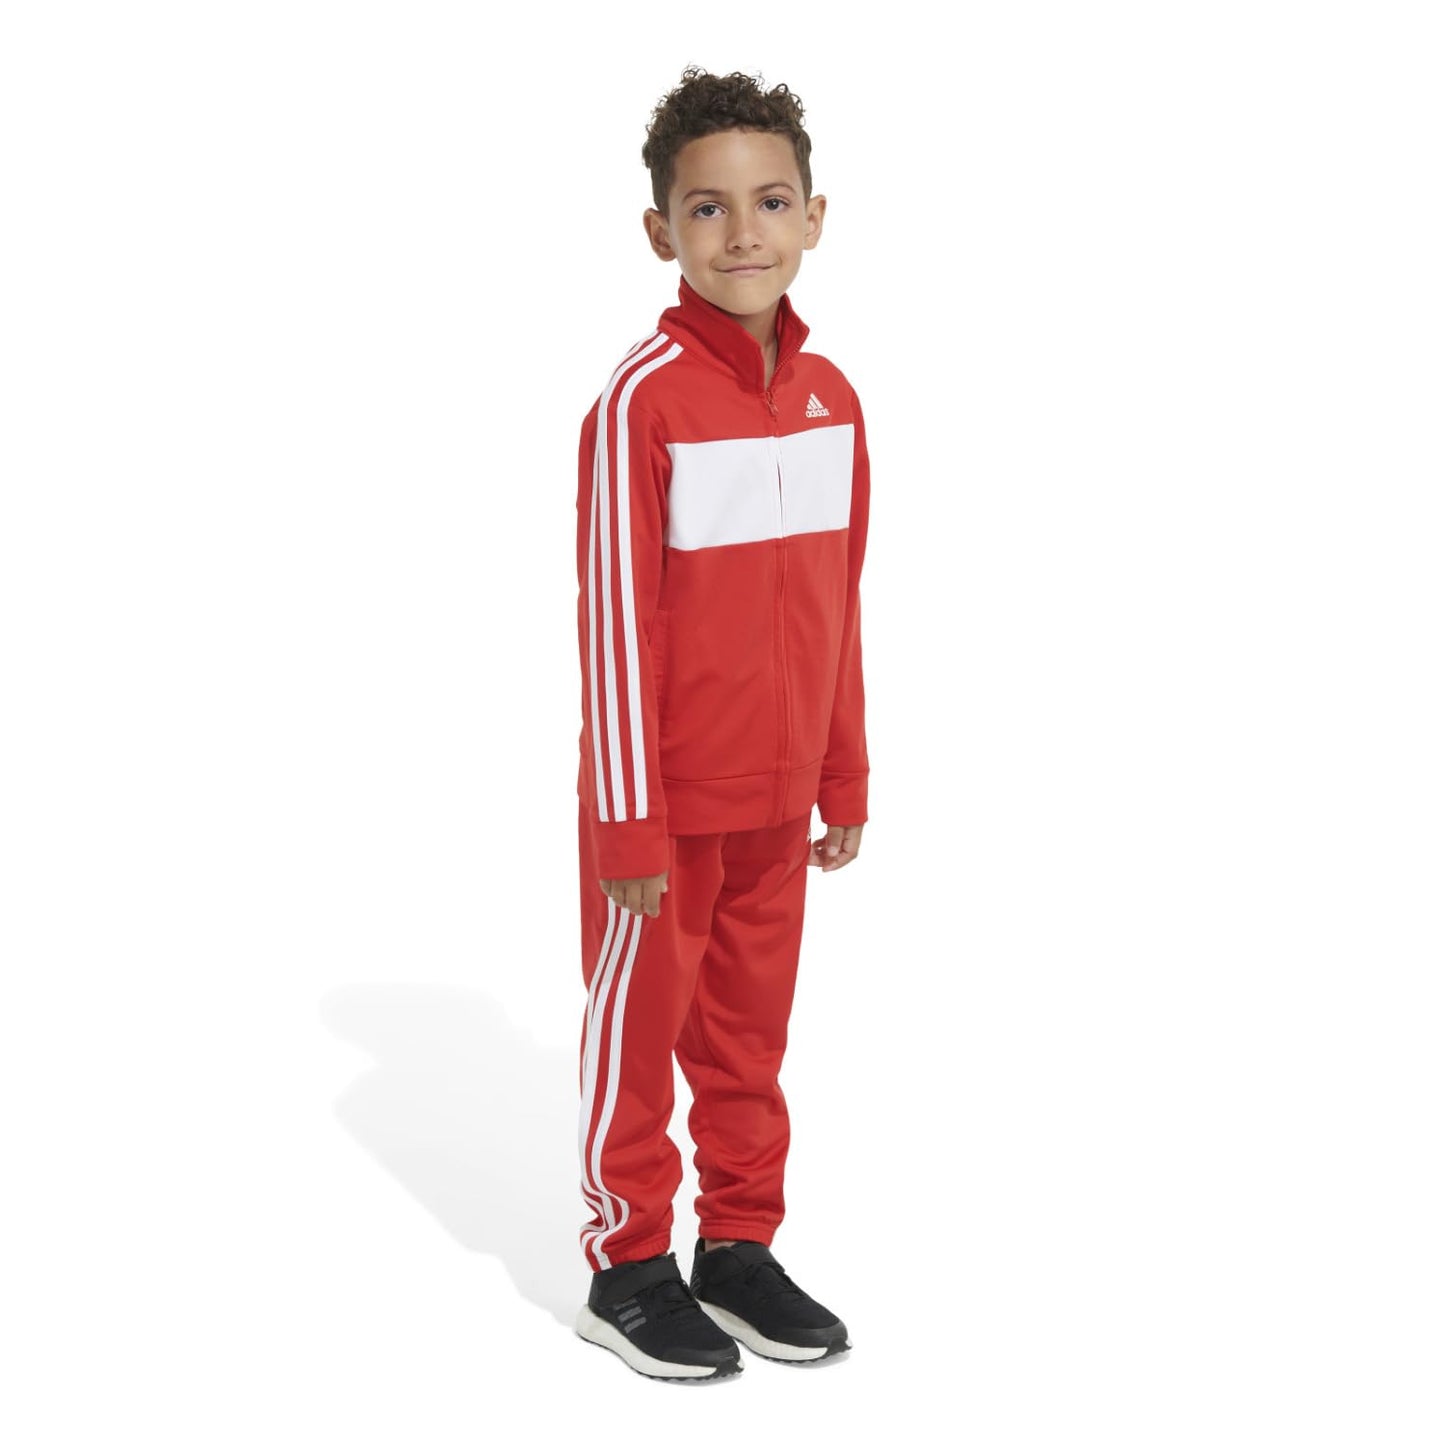 adidas Boys' Little Tricot Jacket & Pant Clothing Set, Essential Tricot Vivid Red, 12 Months (AG6443N)